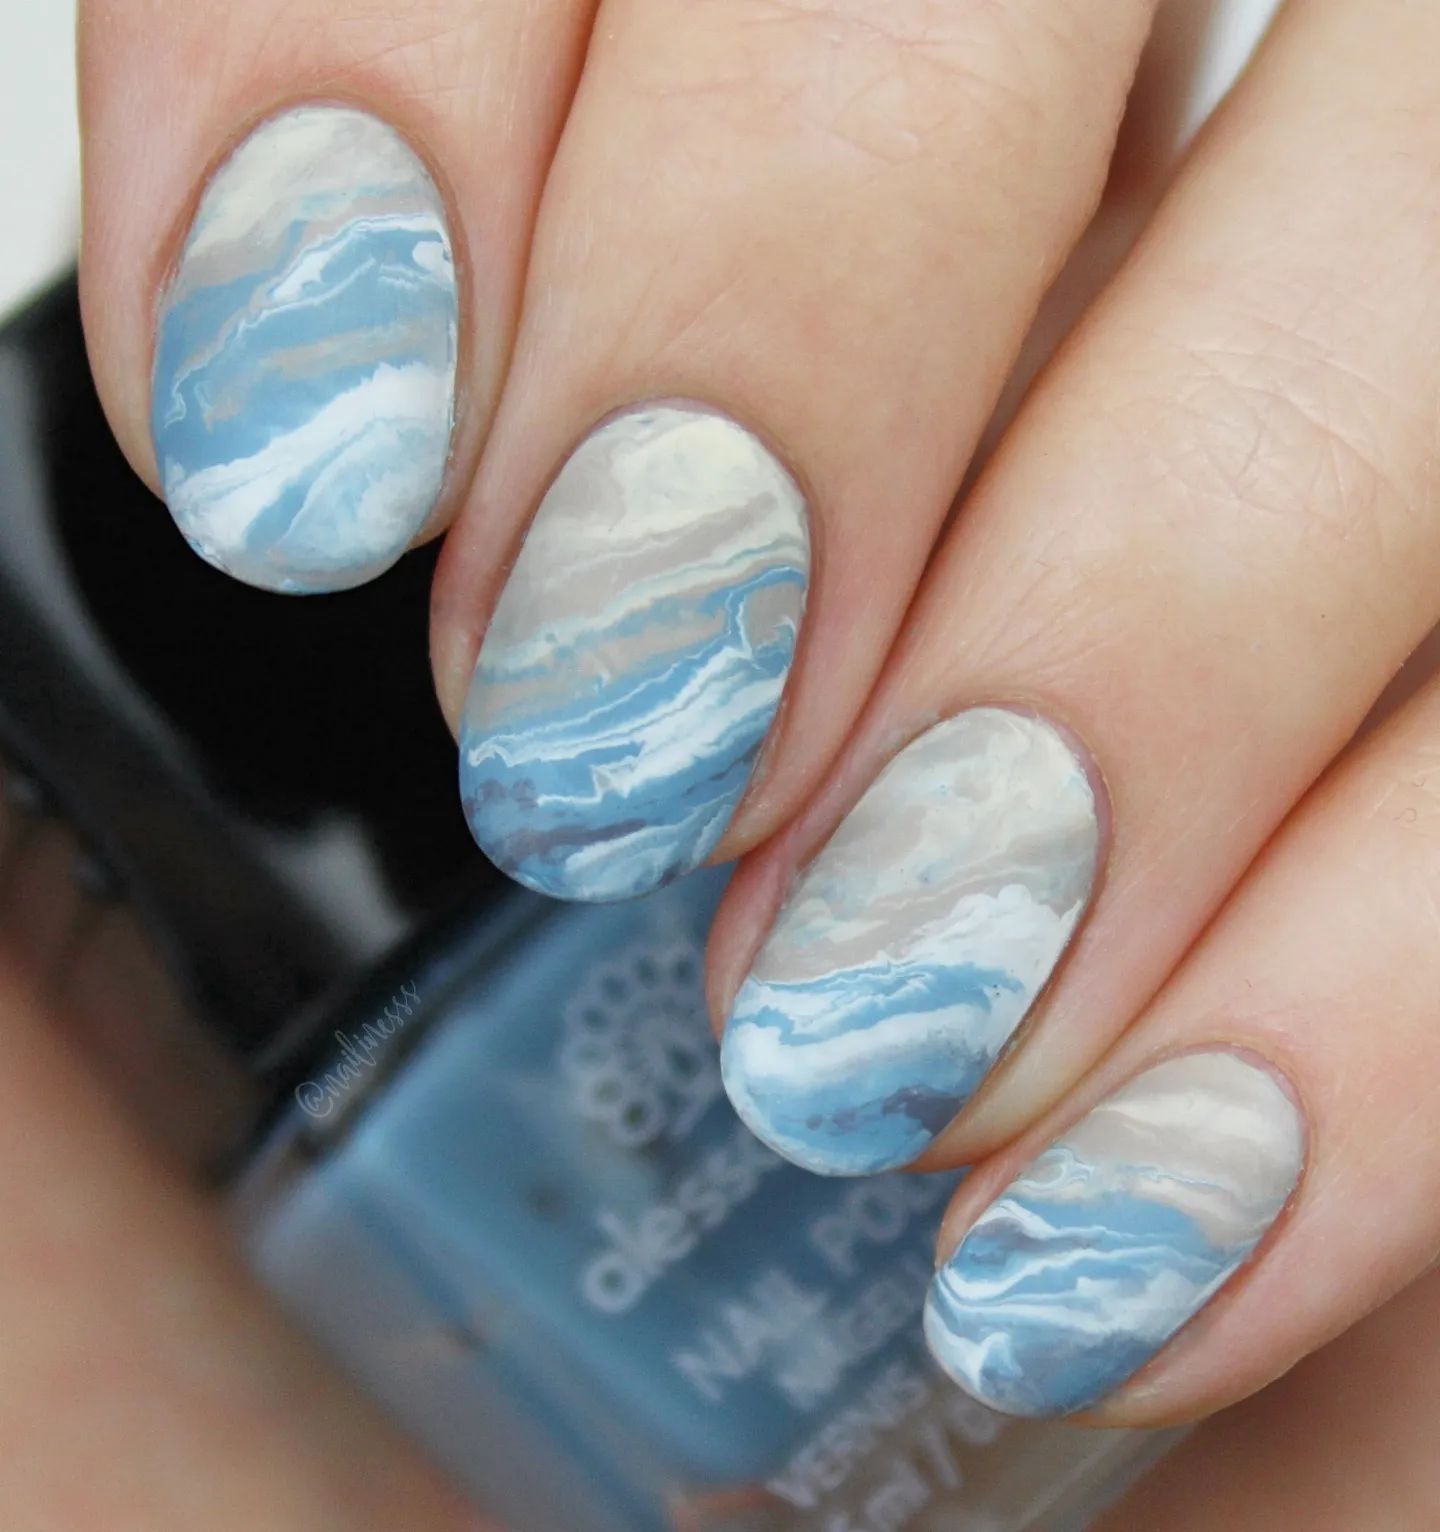 Beach Summer Nails with Waves